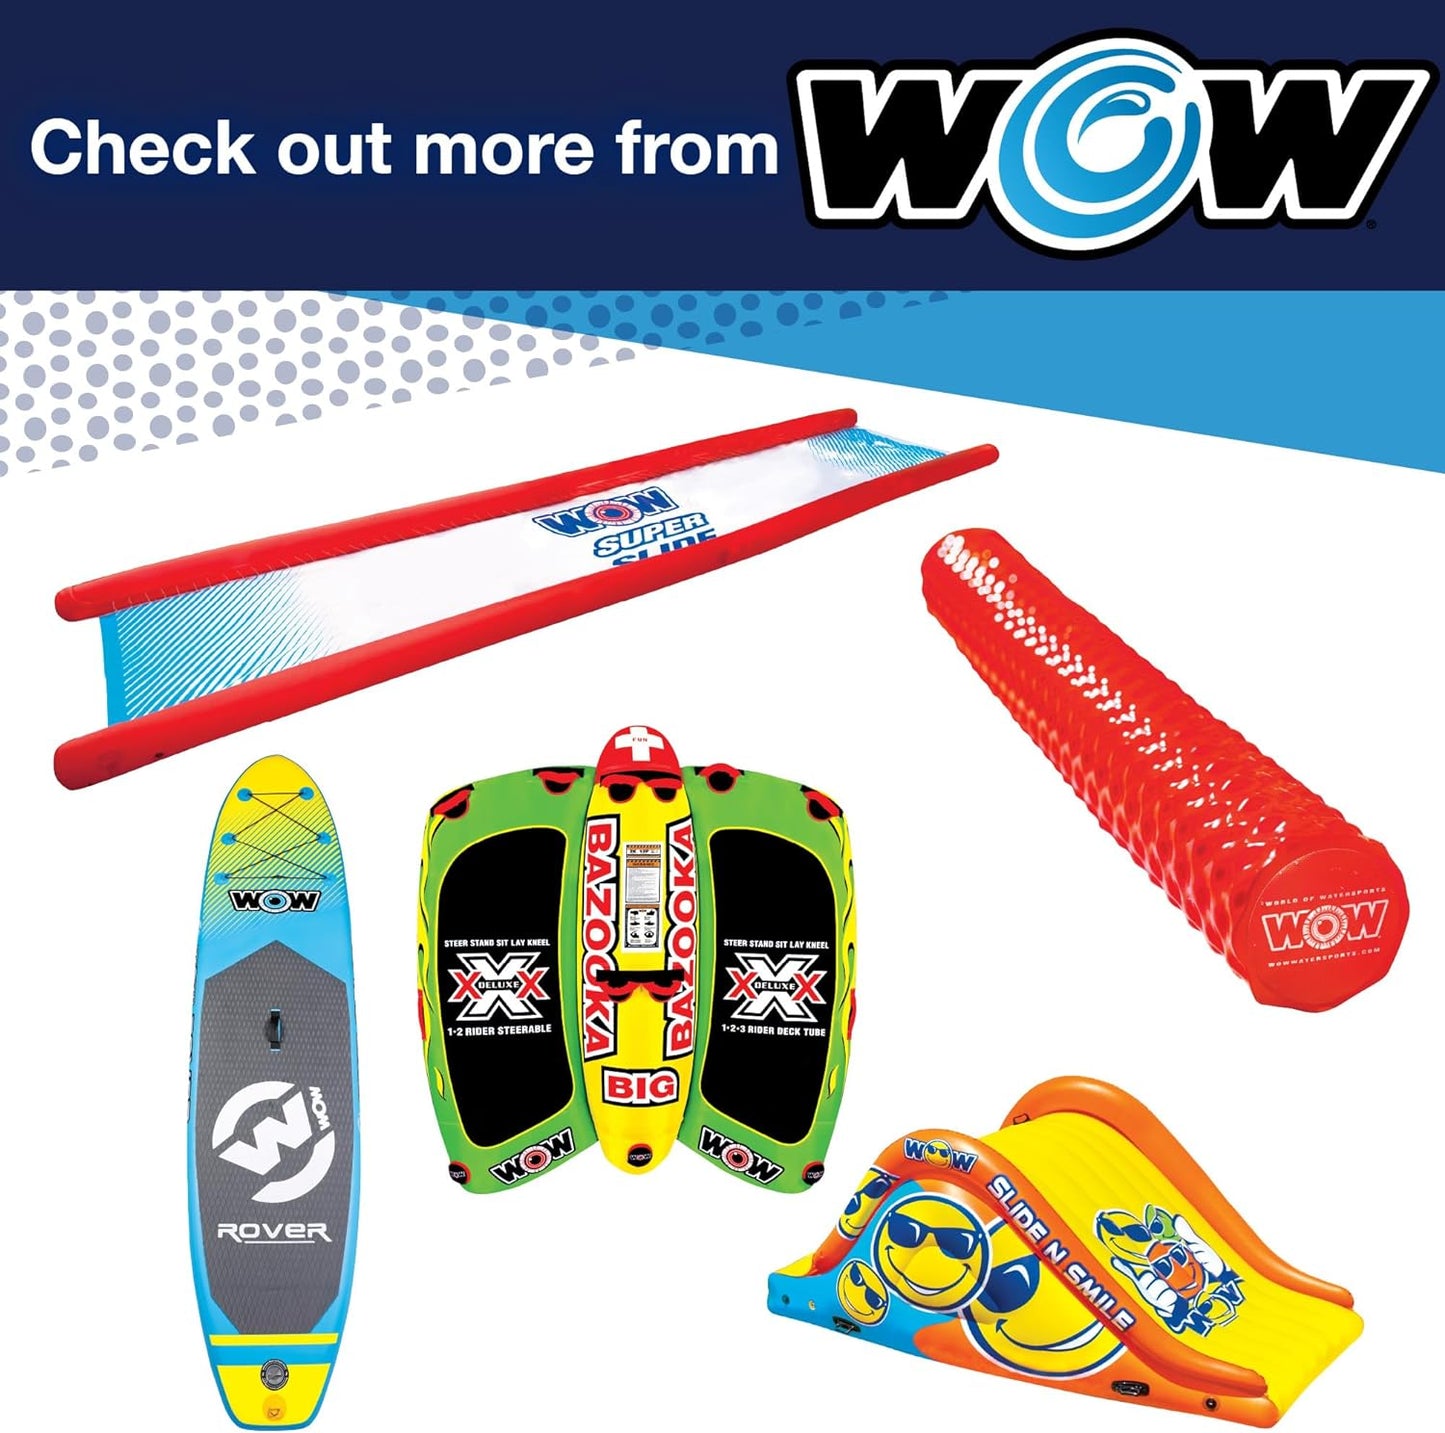 WOW World of Watersports First Class Foam Pool Noodles for Swimming and Floating, Pool Floats, Lake Floats